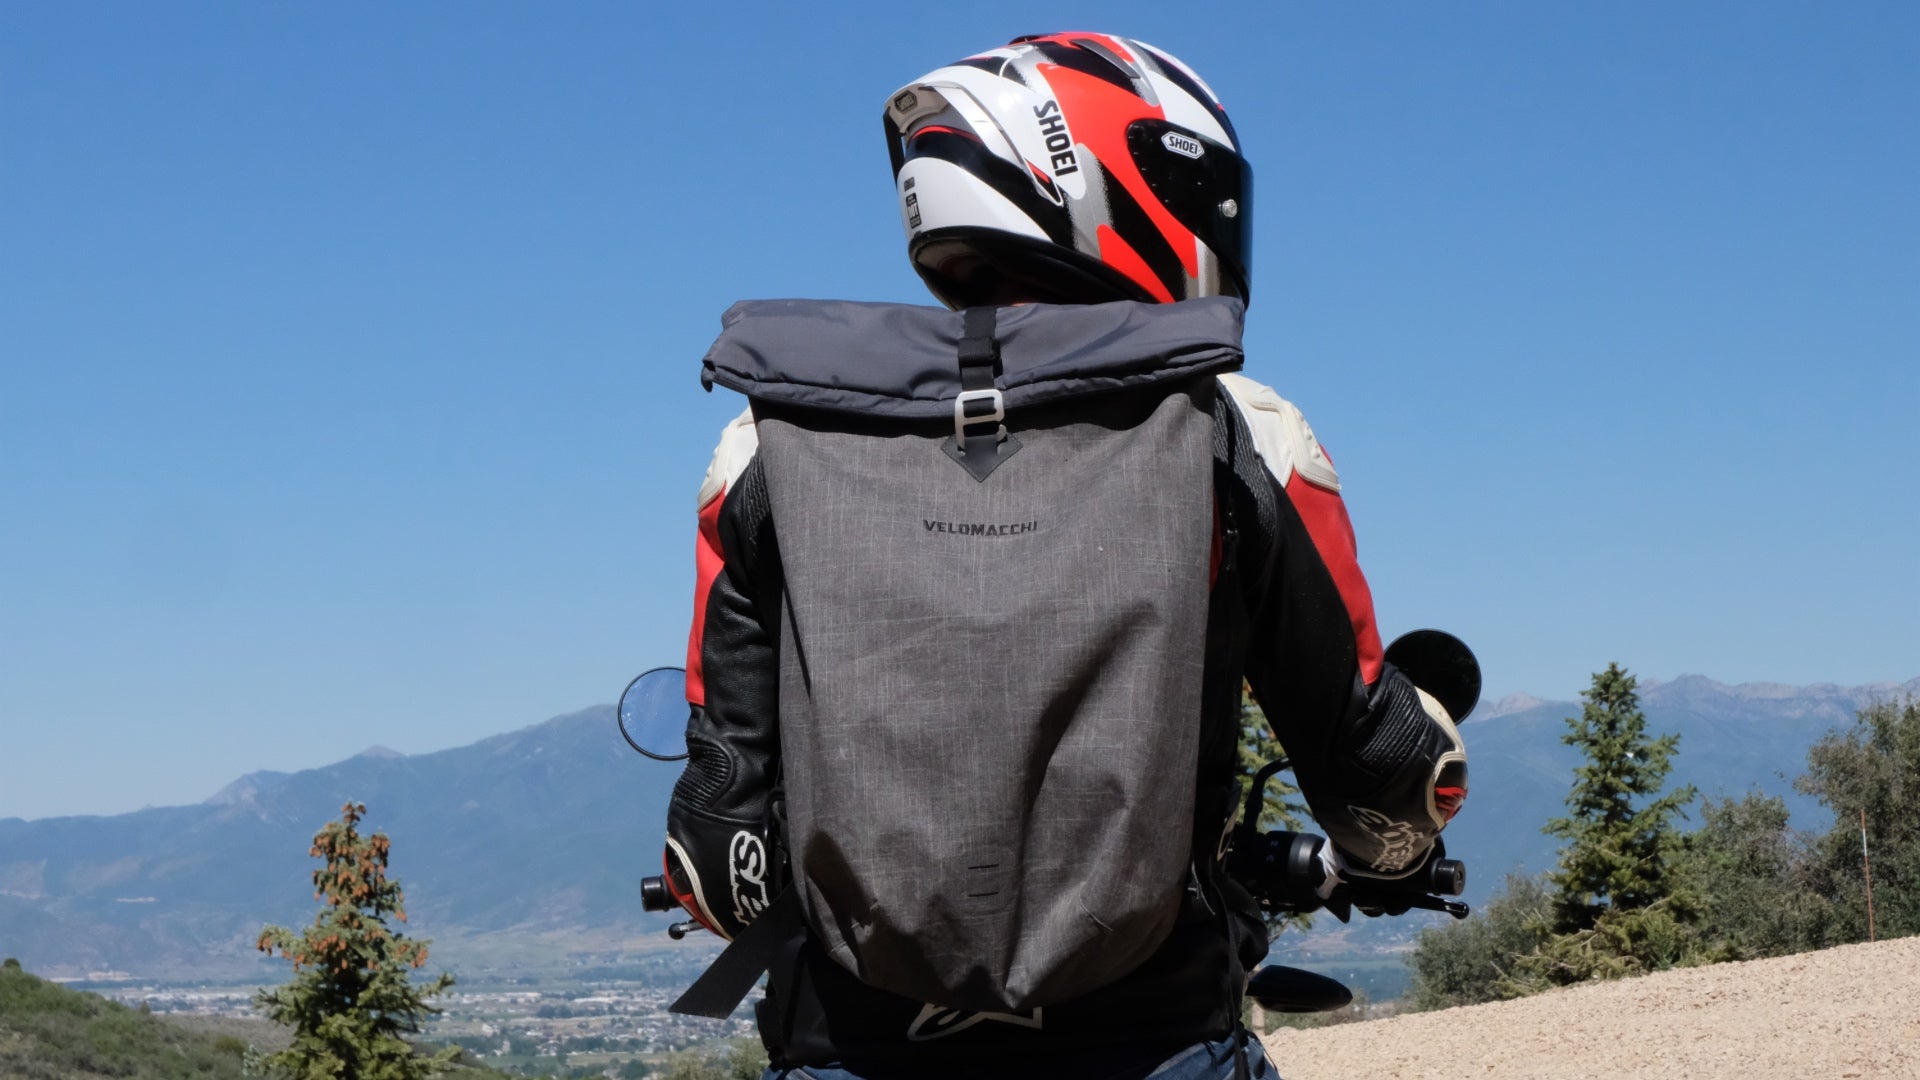 Three Years on, Velomacchi’s 35L Giro Backpack Exceeds Expectations: Review